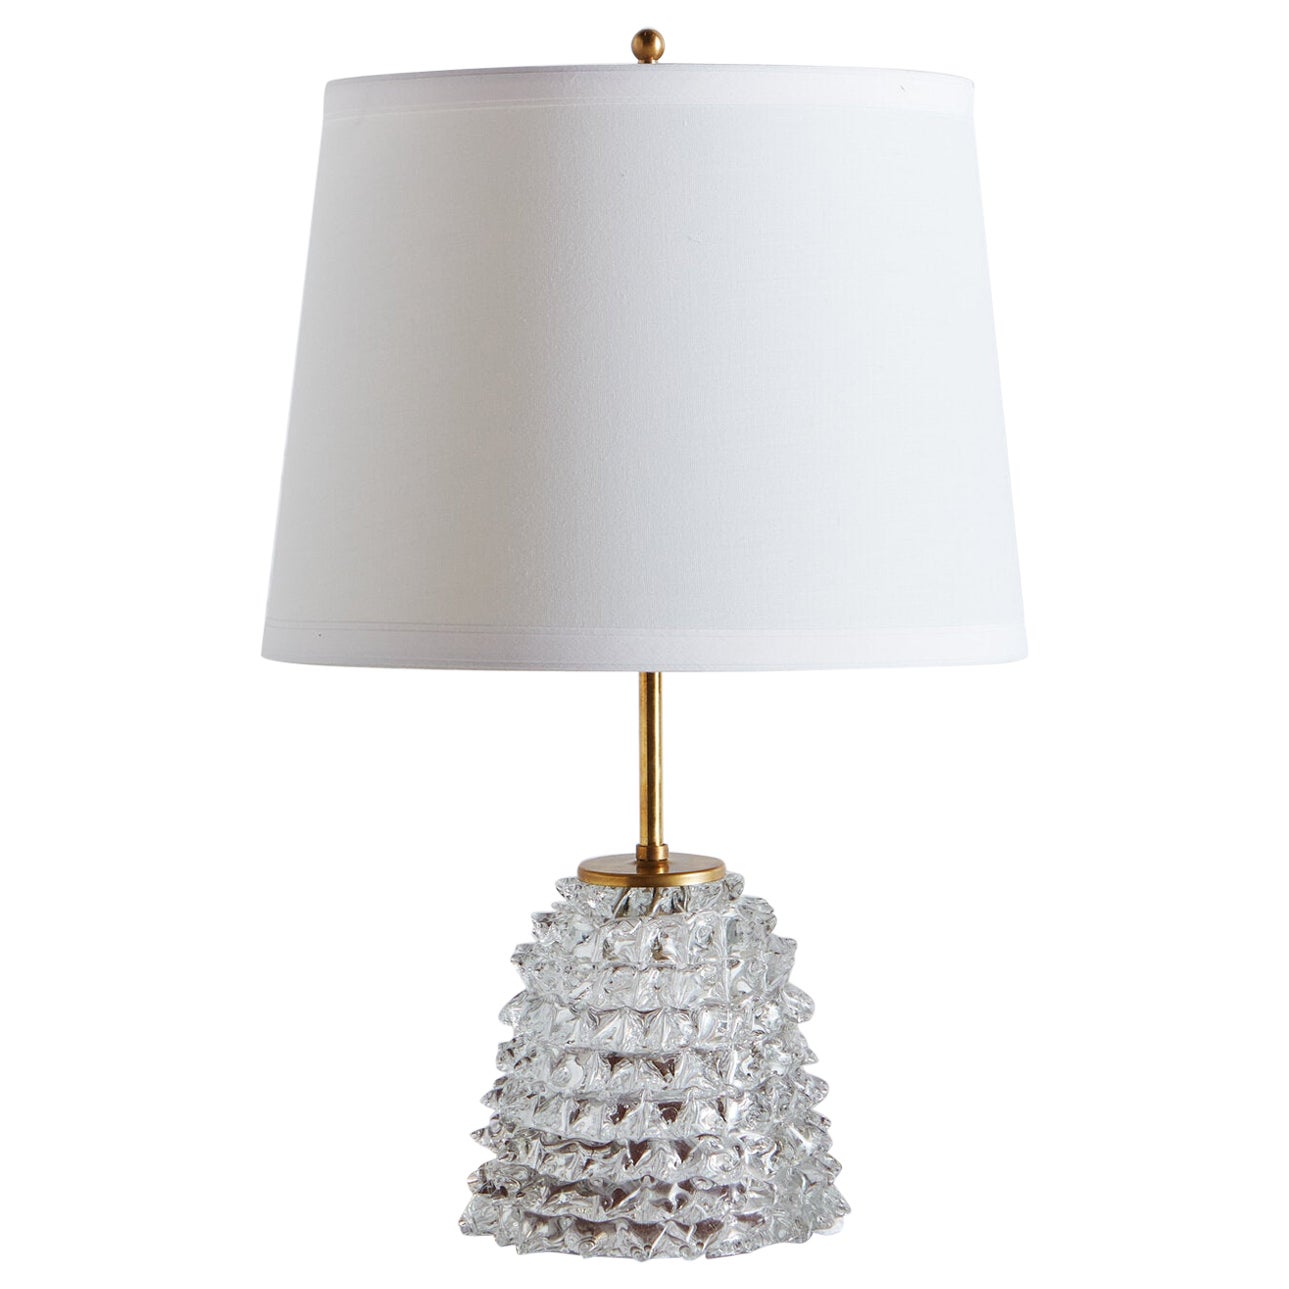 Murano Glass Rostrate Table Lamp Attributed to Barovier & Toso